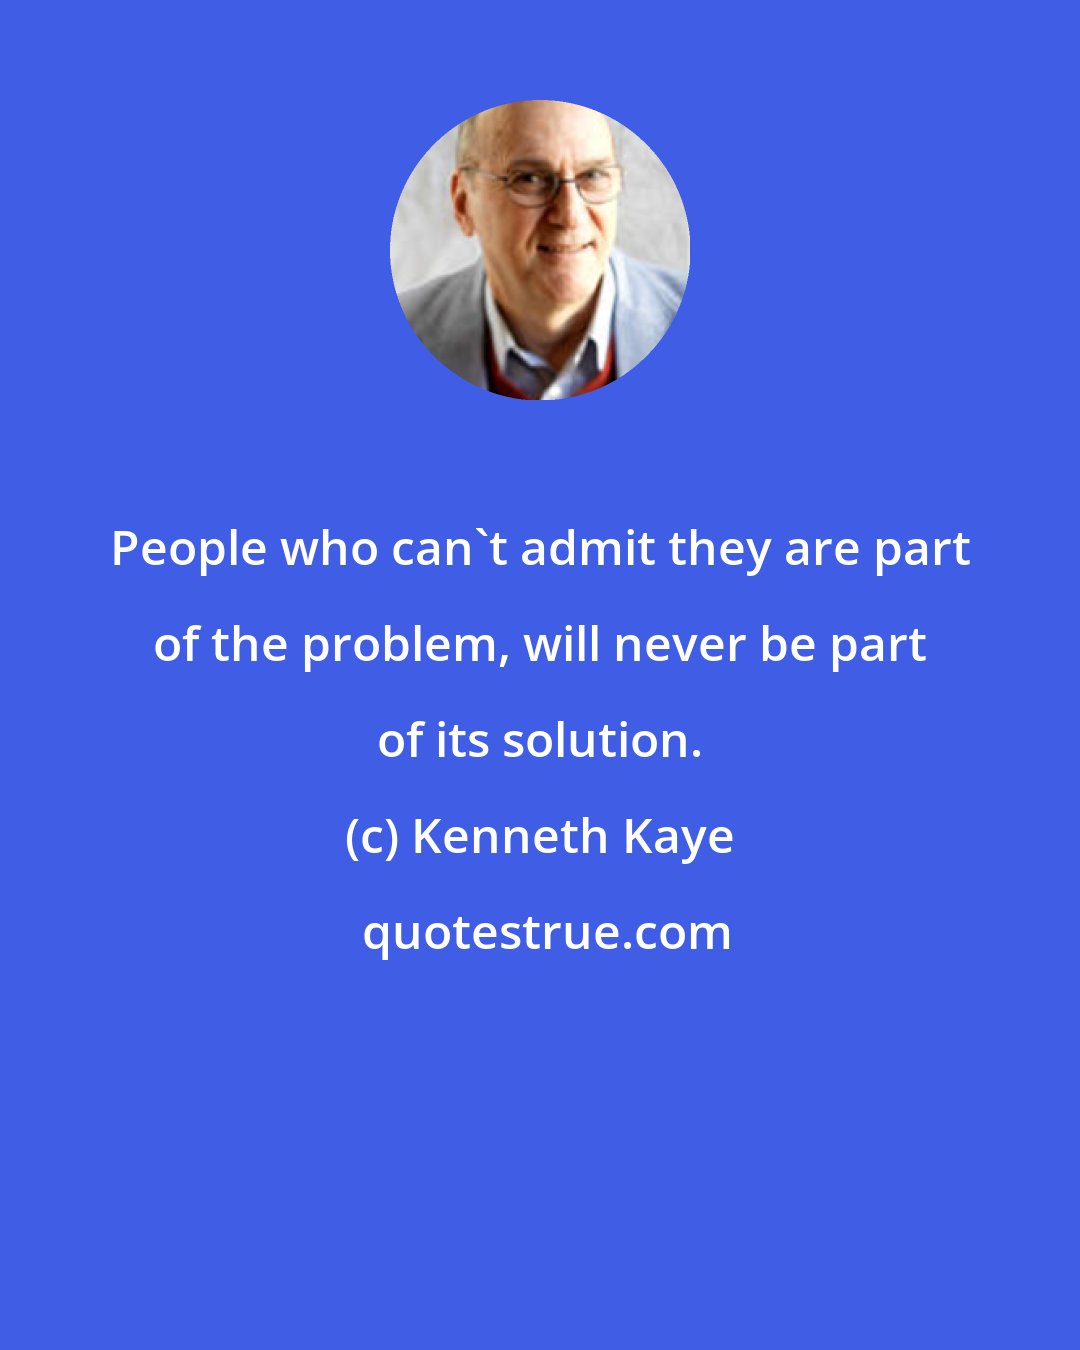 Kenneth Kaye: People who can't admit they are part of the problem, will never be part of its solution.